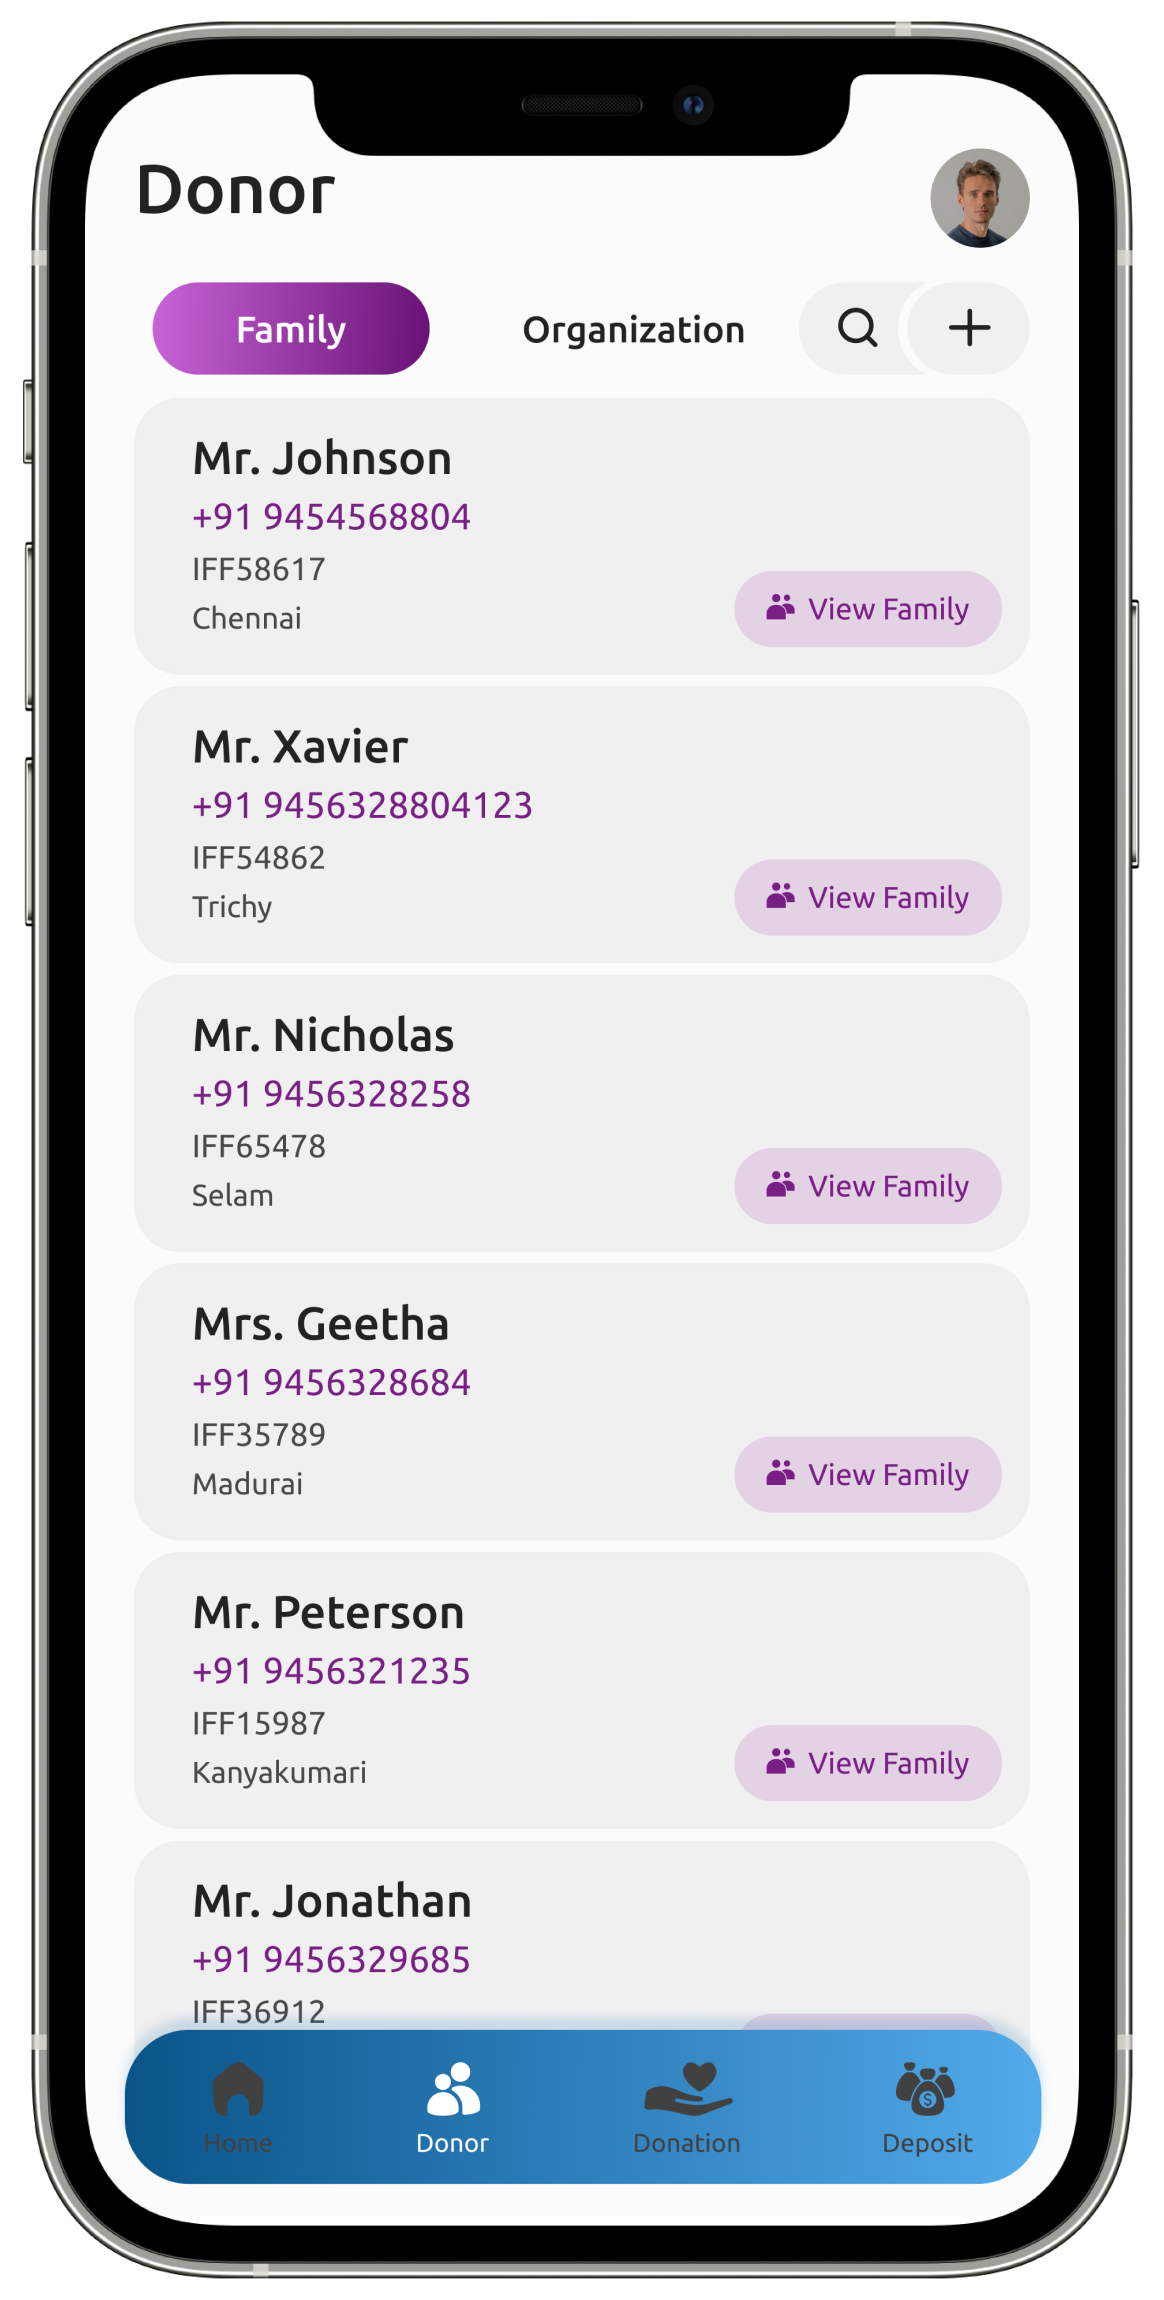 Add and maintain family member/organization details